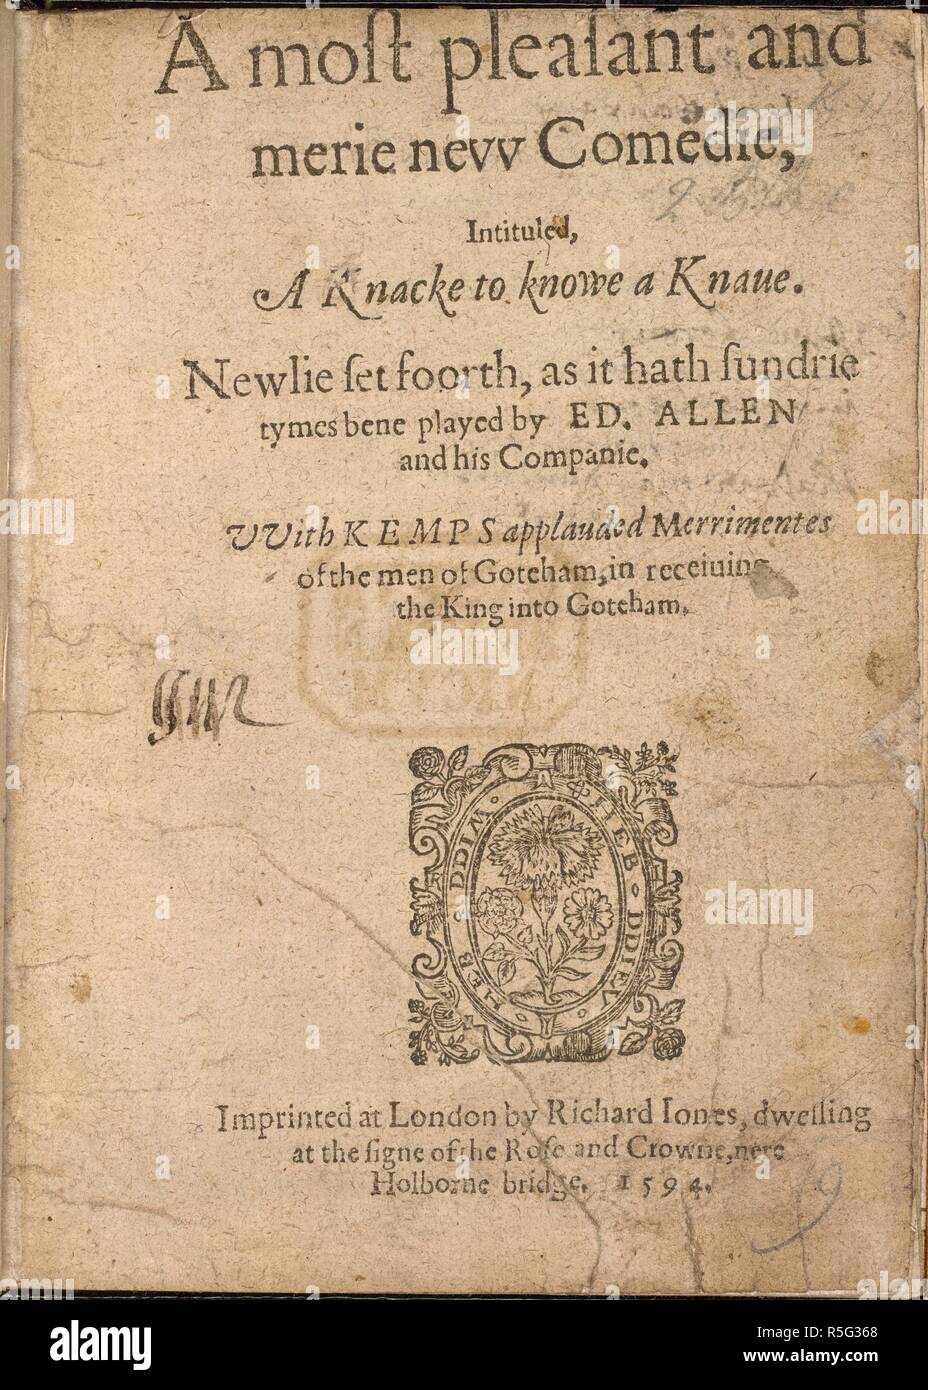 Title page of 'A most pleasant and merie new Comedie'. A most pleasant and merie new Comedie [in verse and prose] intituled, A Knacke to knowe a Knave. Newlie set foorth as it hath sundrie tymes bene played by Ed. Allen and his Companie. With Kemps applauded Merrimentes of the Men of Geteham, etc. B.L. Richard Jones: London, 1594. Source: C.34.b.26, title page. Language: English. Stock Photo